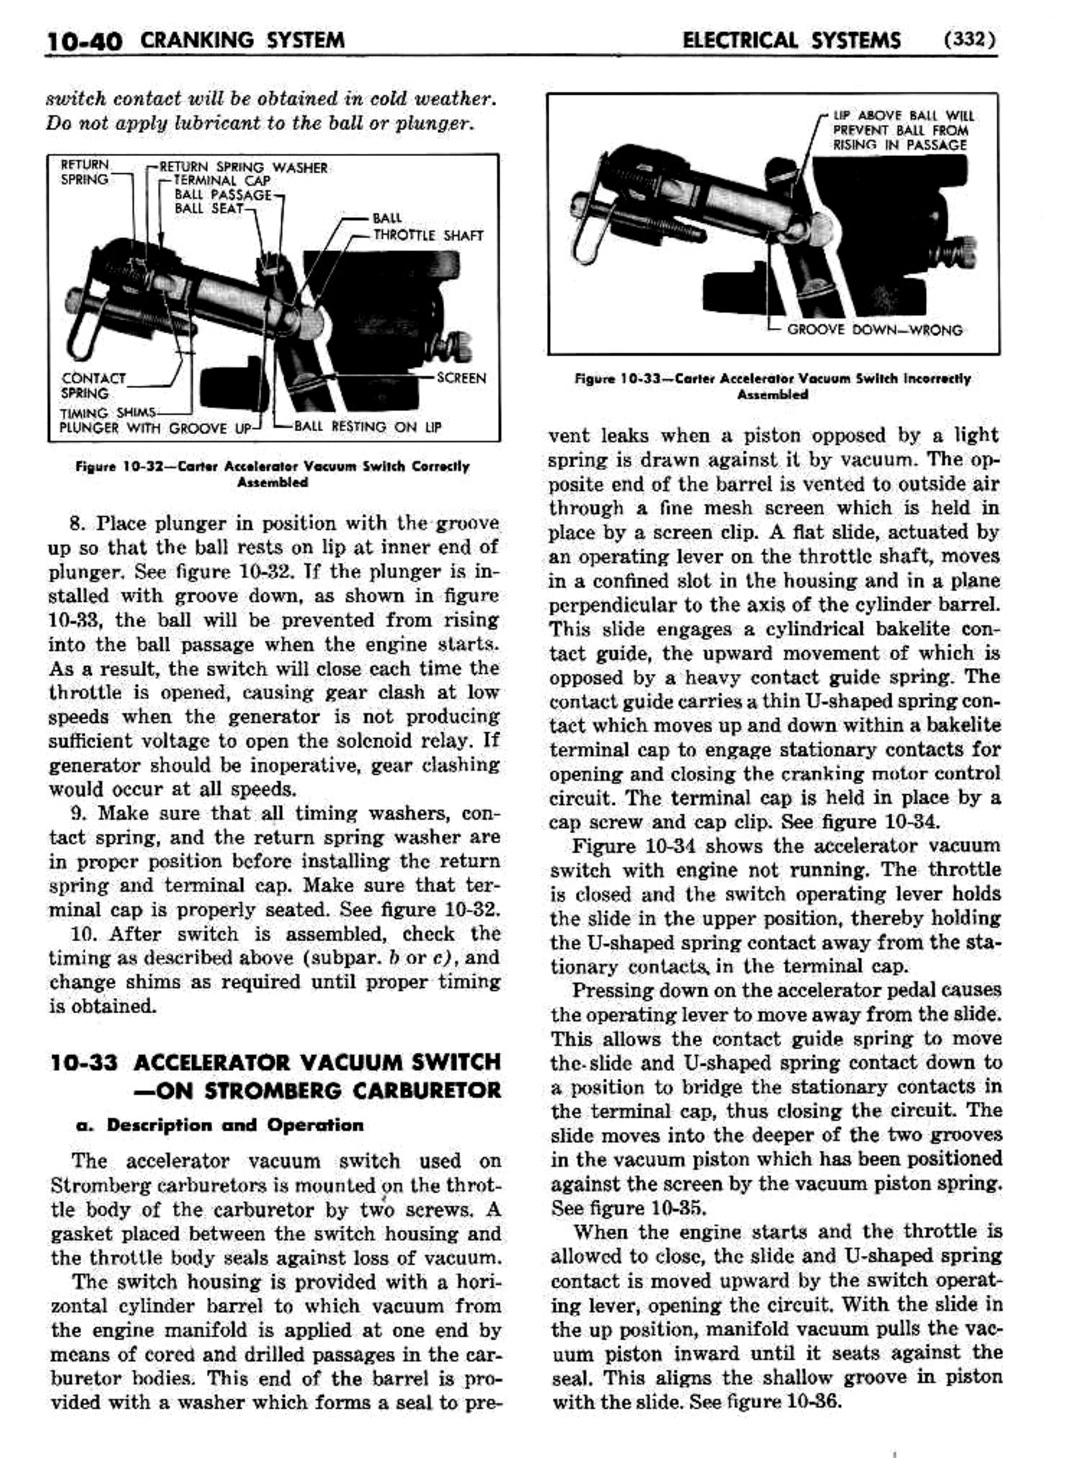 n_11 1951 Buick Shop Manual - Electrical Systems-040-040.jpg